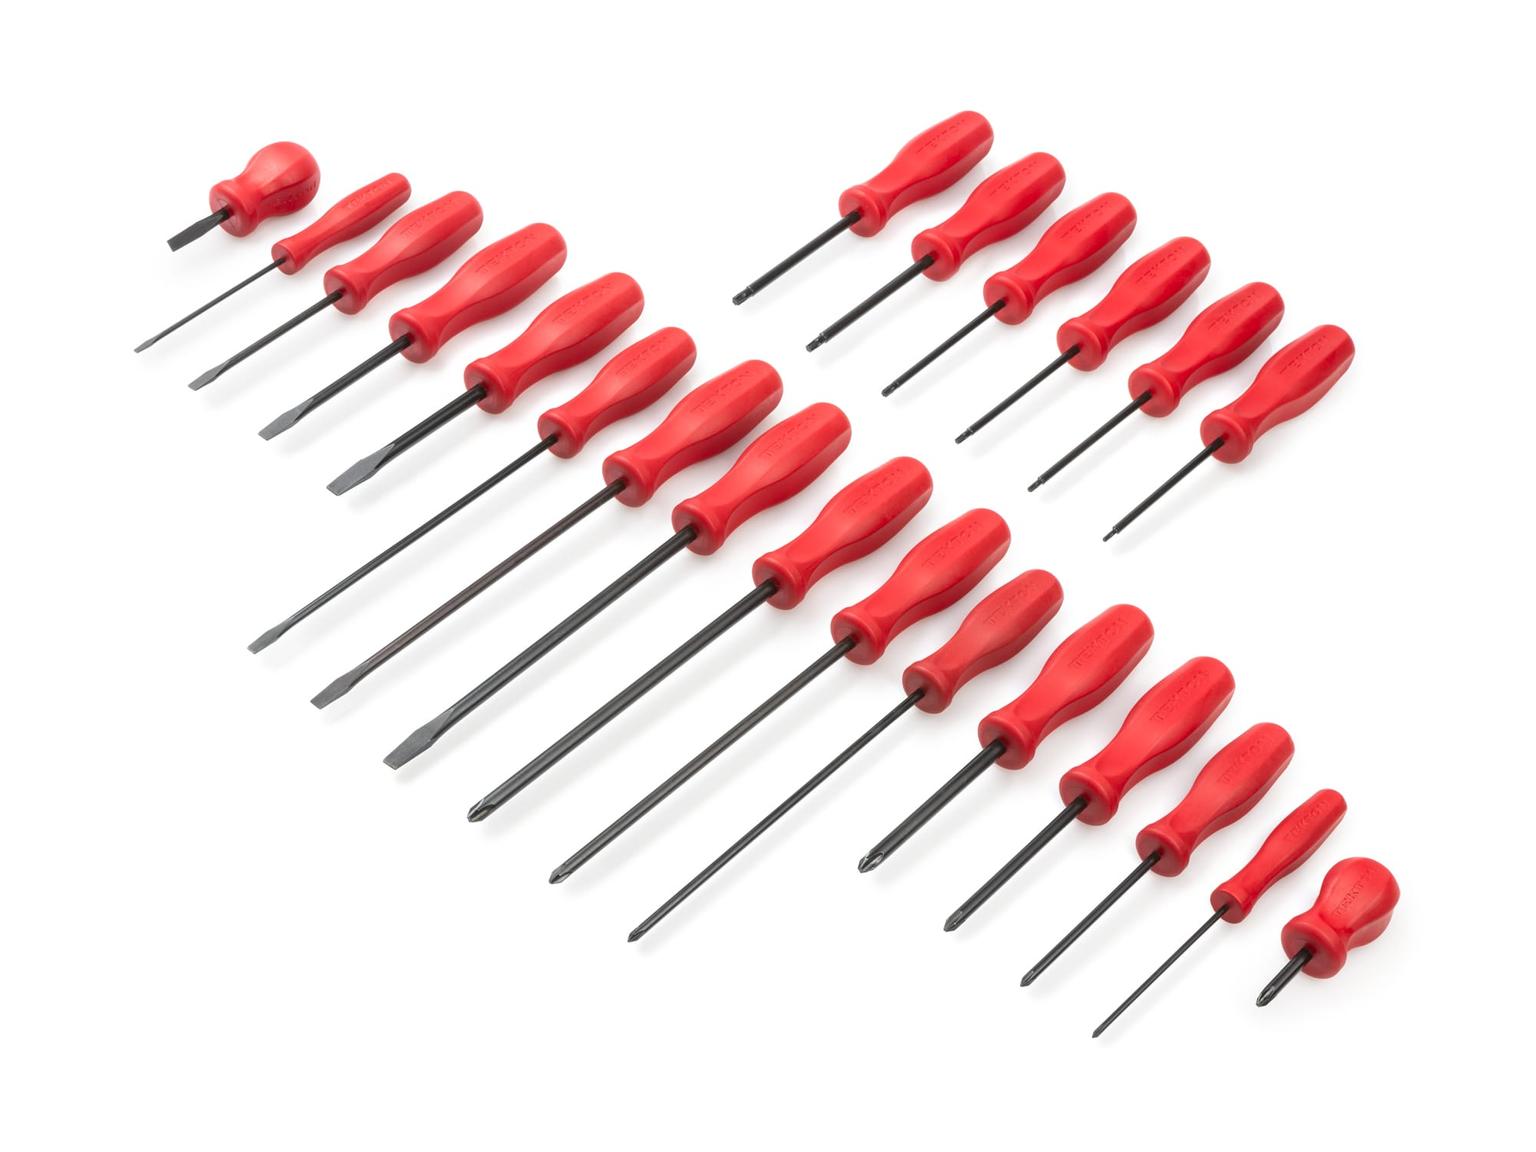 TEKTON DRV40502-T Hard Handle Black Oxide Blade Screwdriver Set, 22-Piece (#0-#3, 1/8-5/16 in., T10-30) with Red Rails